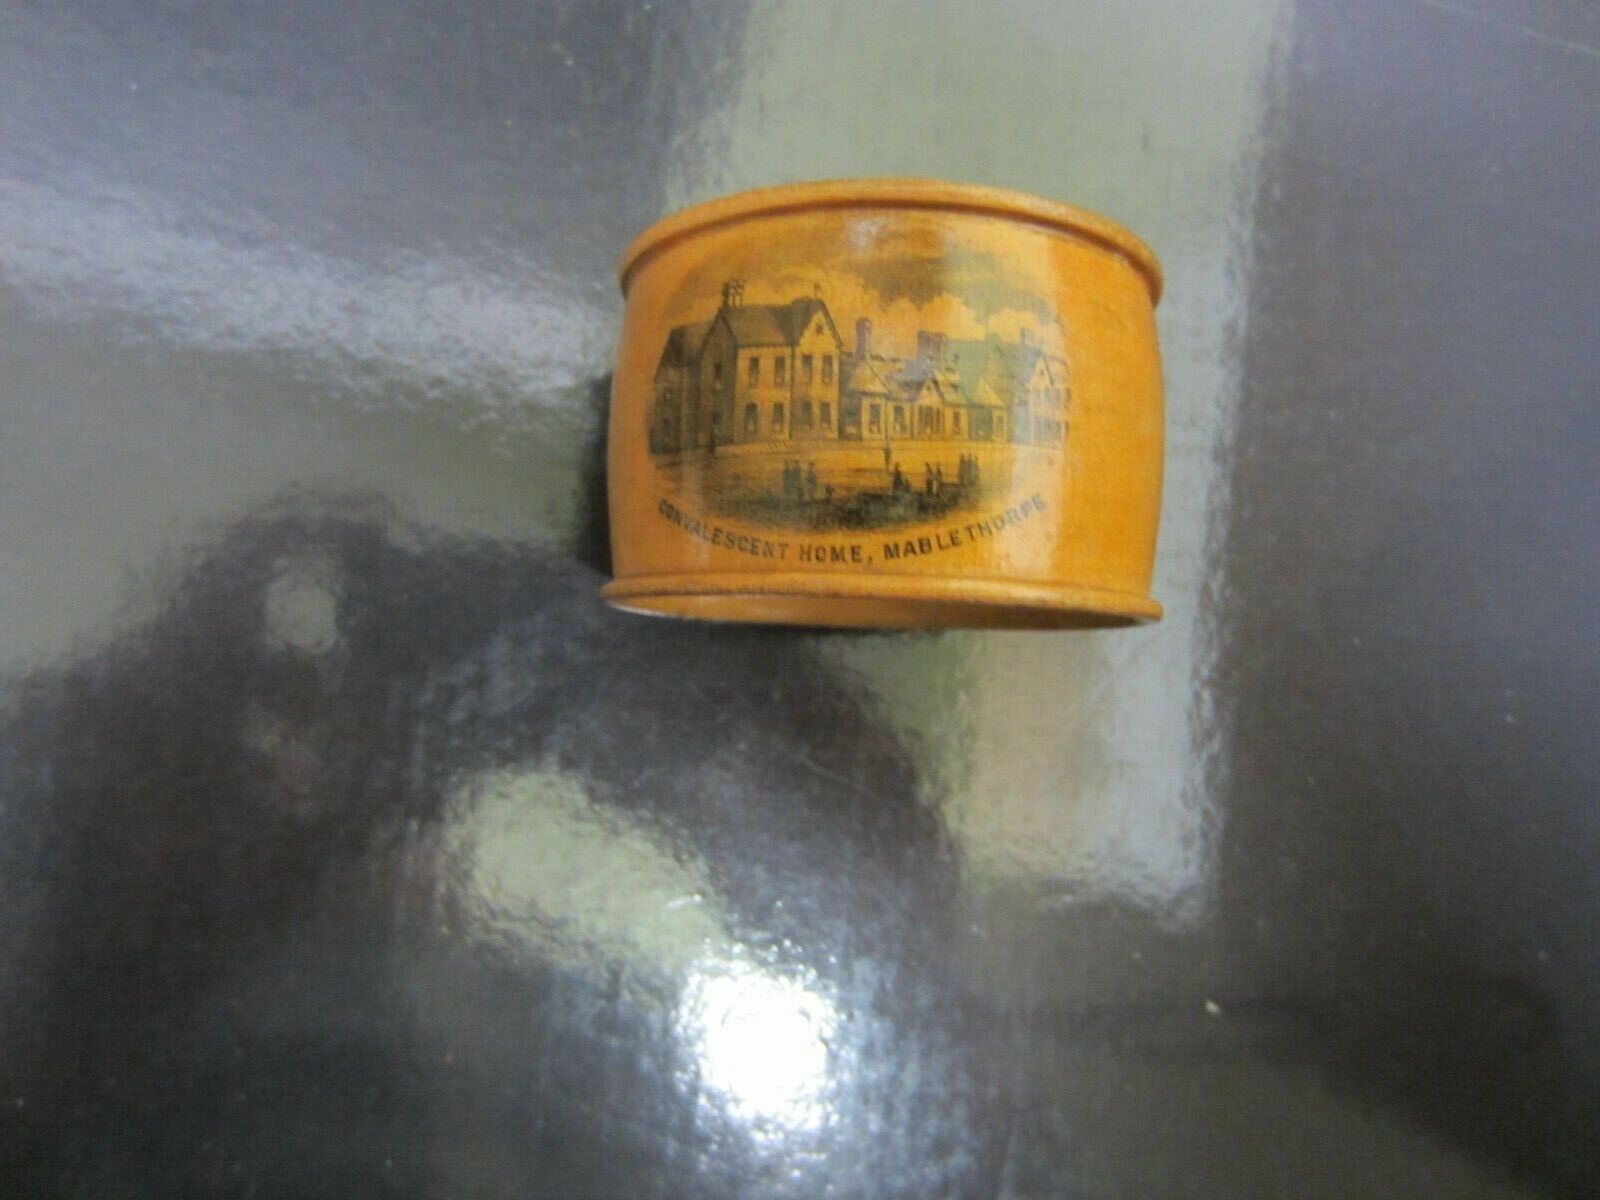 Transfer Ware Napkin Ring No 5 with a view of Convalescent Home - Mauchline Ware